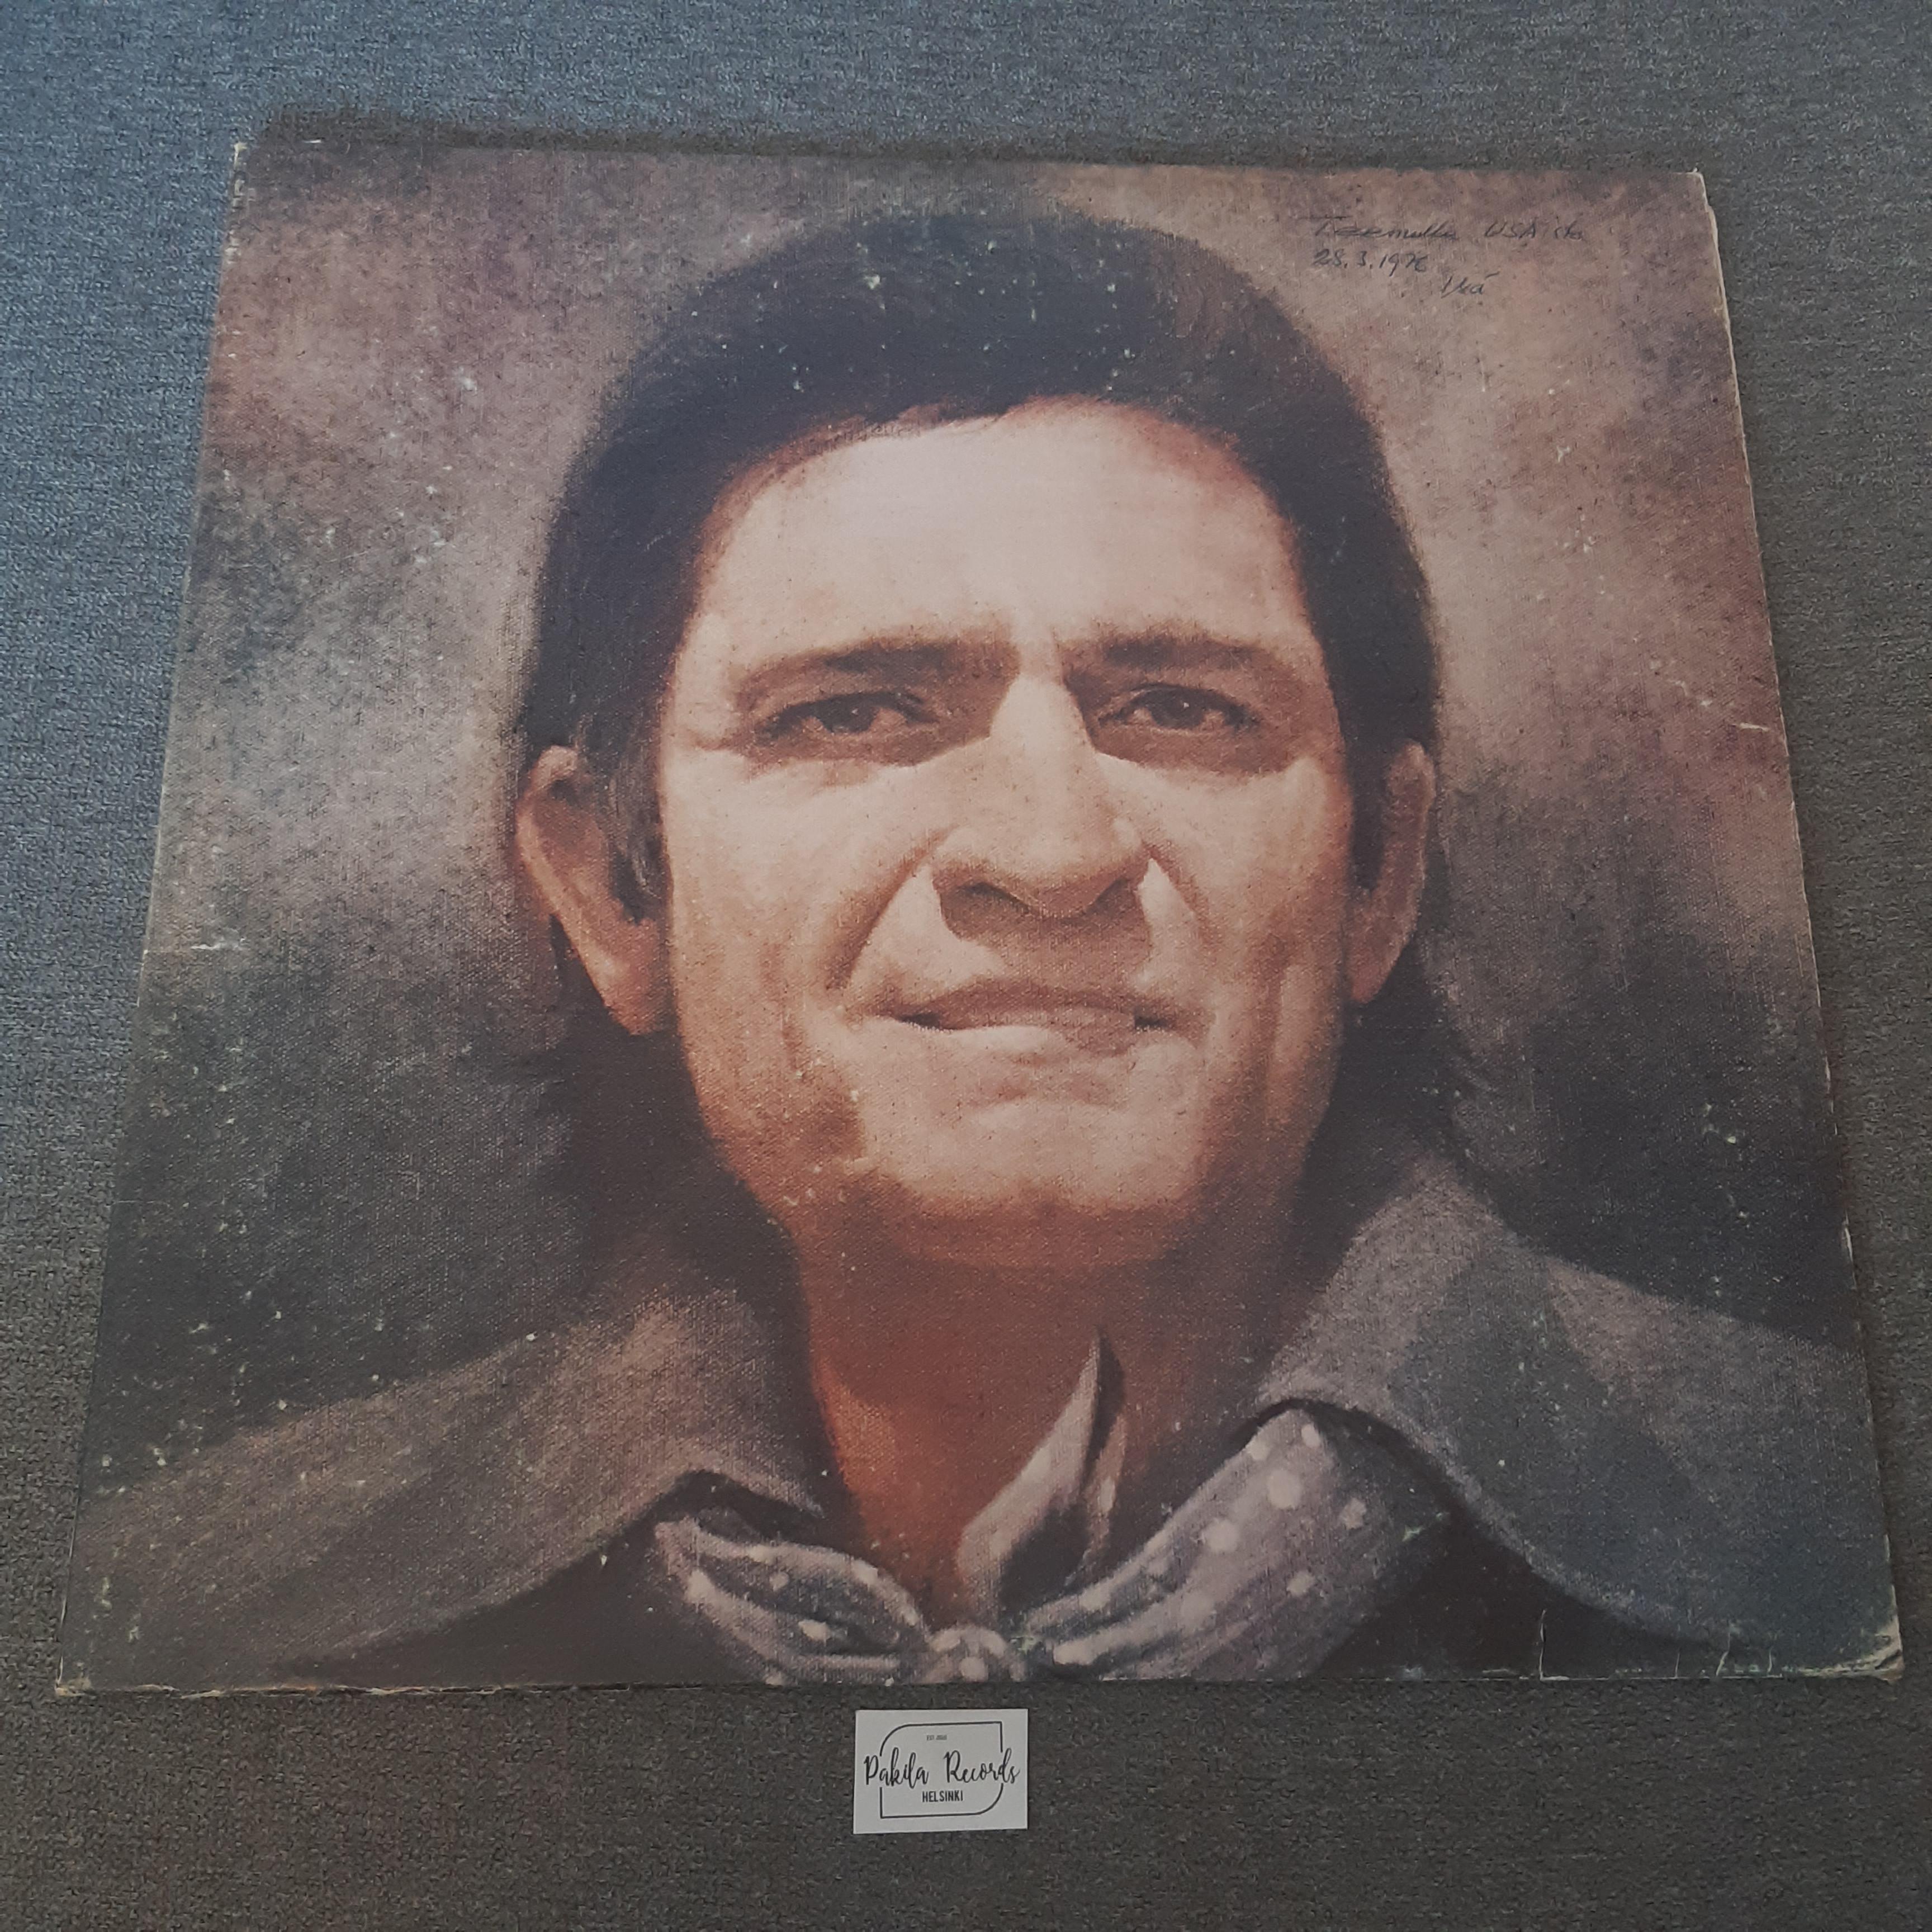 Johnny Cash - The Johnny Cash Collection, His Greatest Hits, Volume II - LP (käytetty)